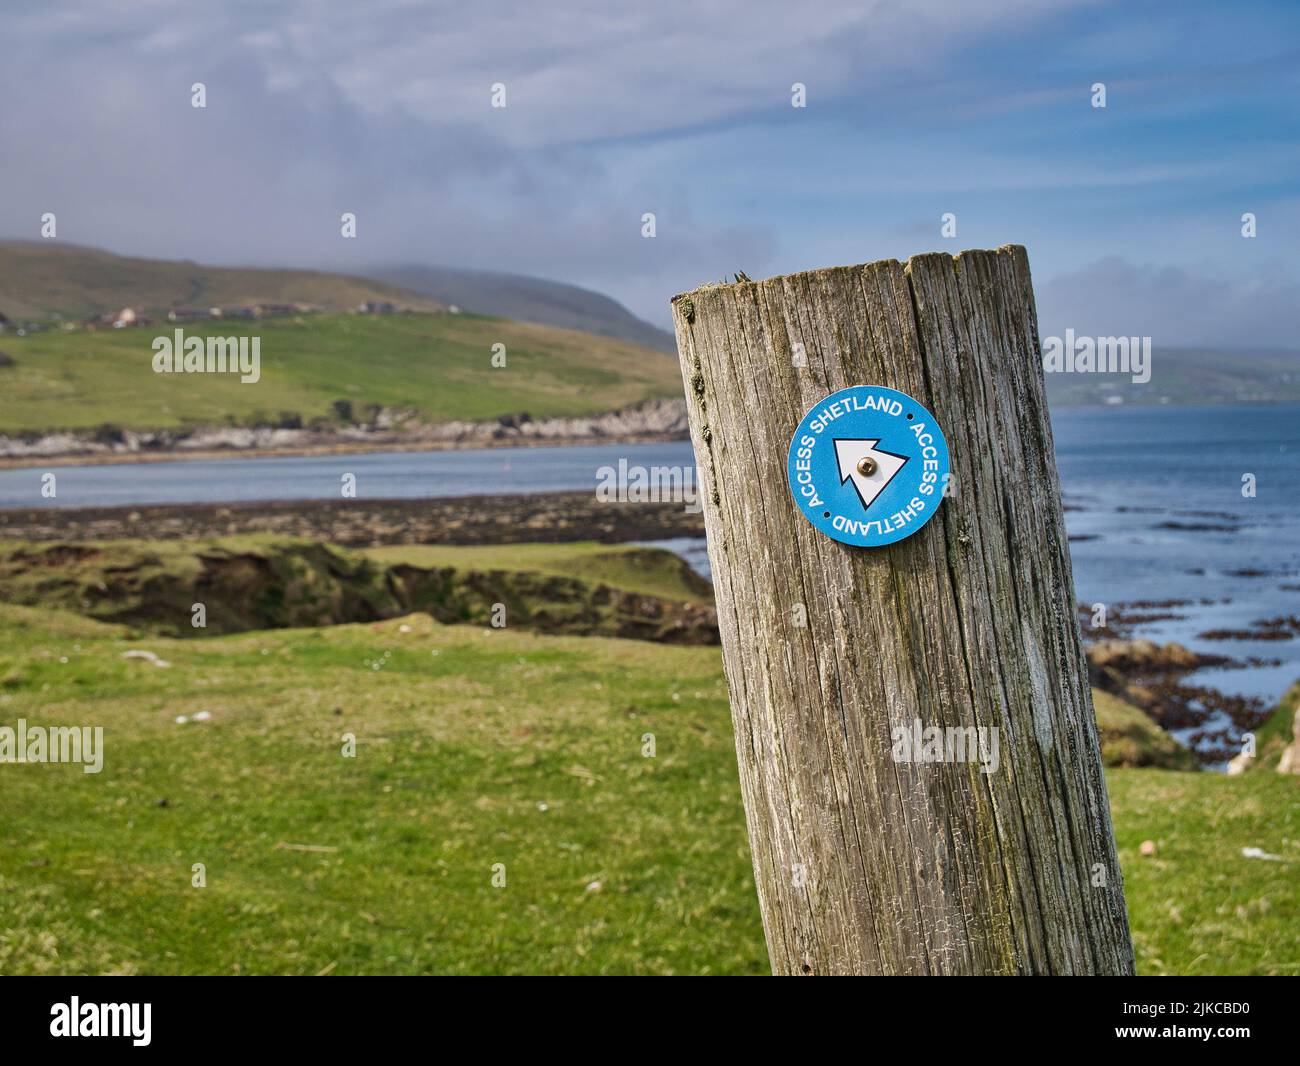 Fixed to a wooden post on the coast, a blue and white Access Shetland sign near Sandwick in Shetland, UK shows the way to walkers and hikers. Stock Photo